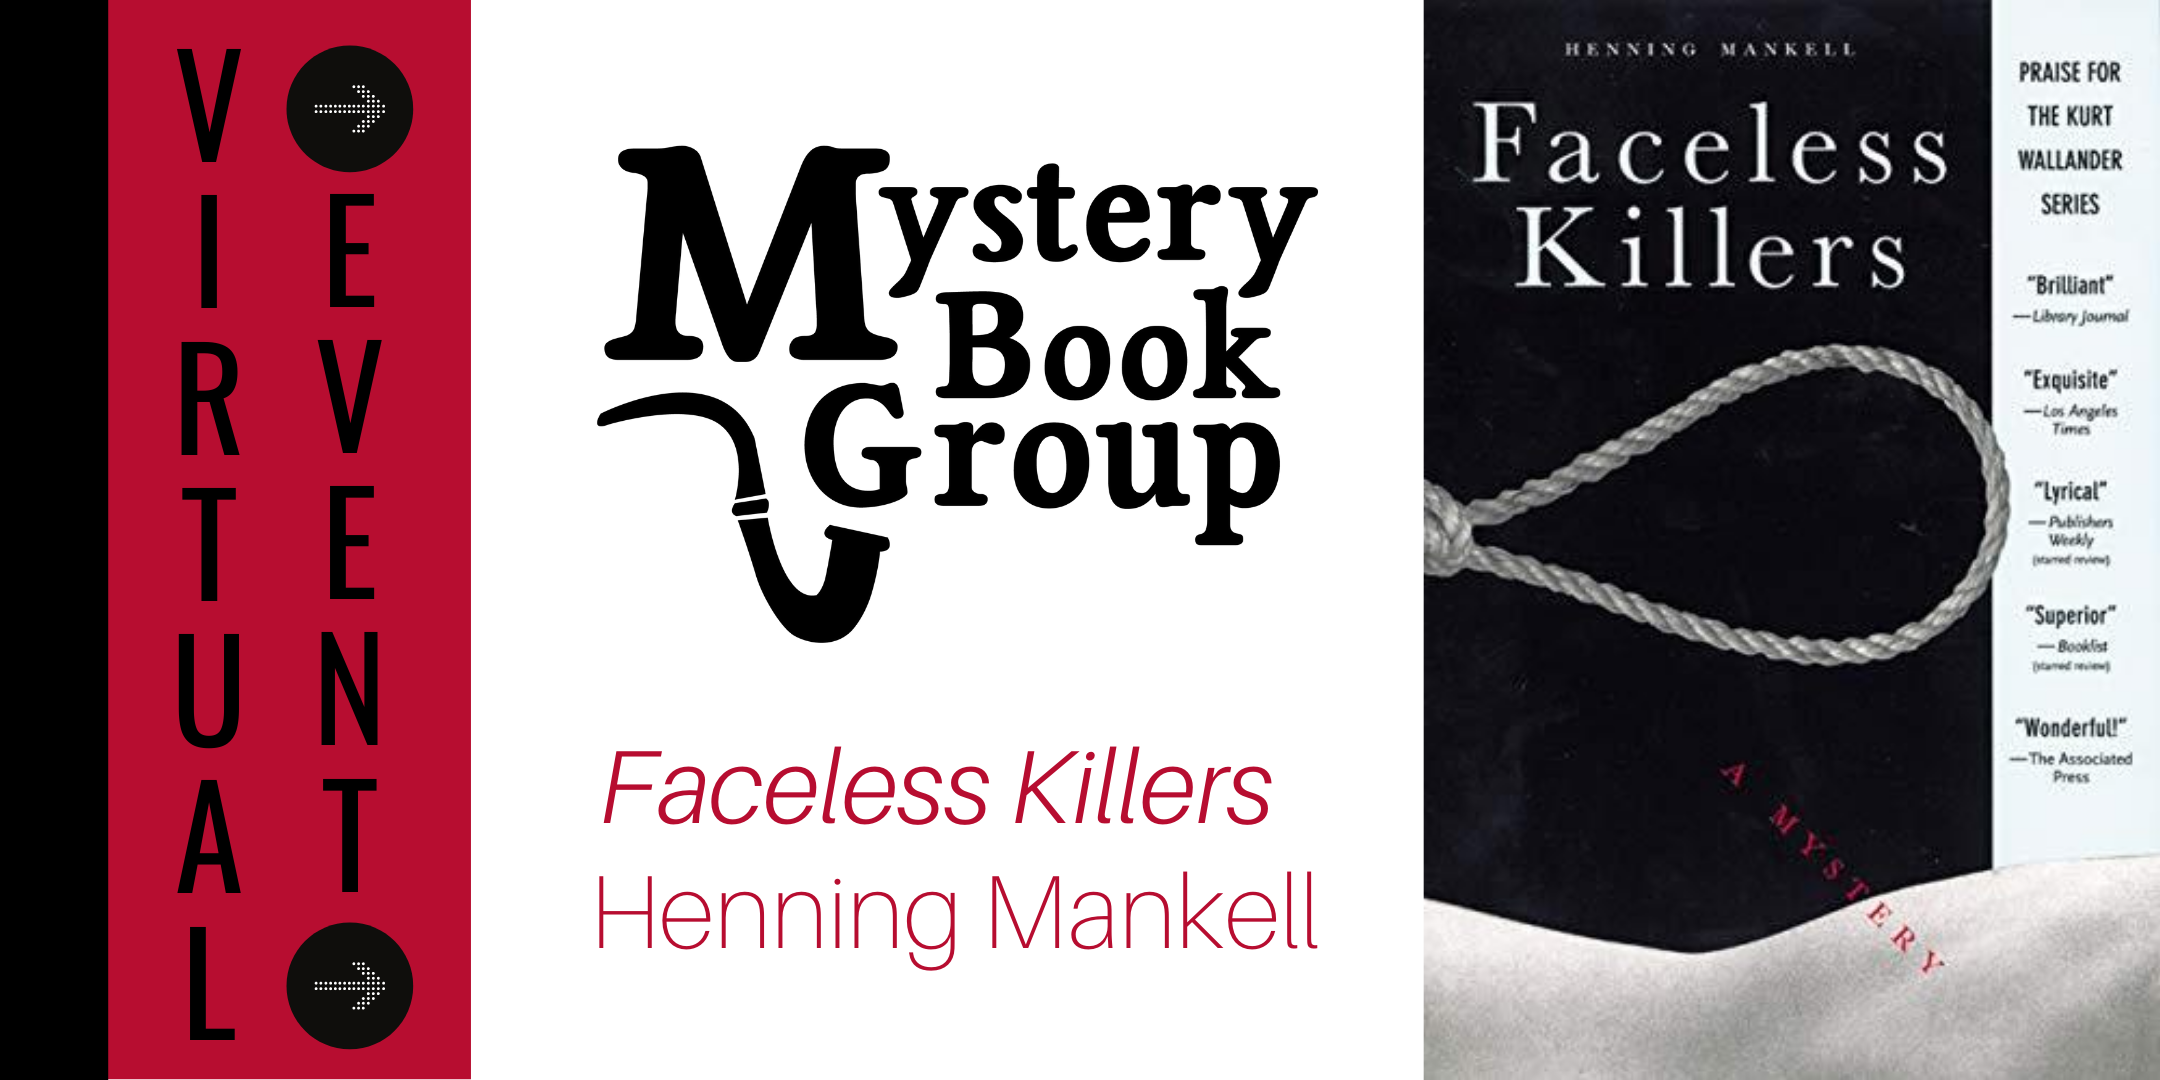 faceless killers by henning mankell